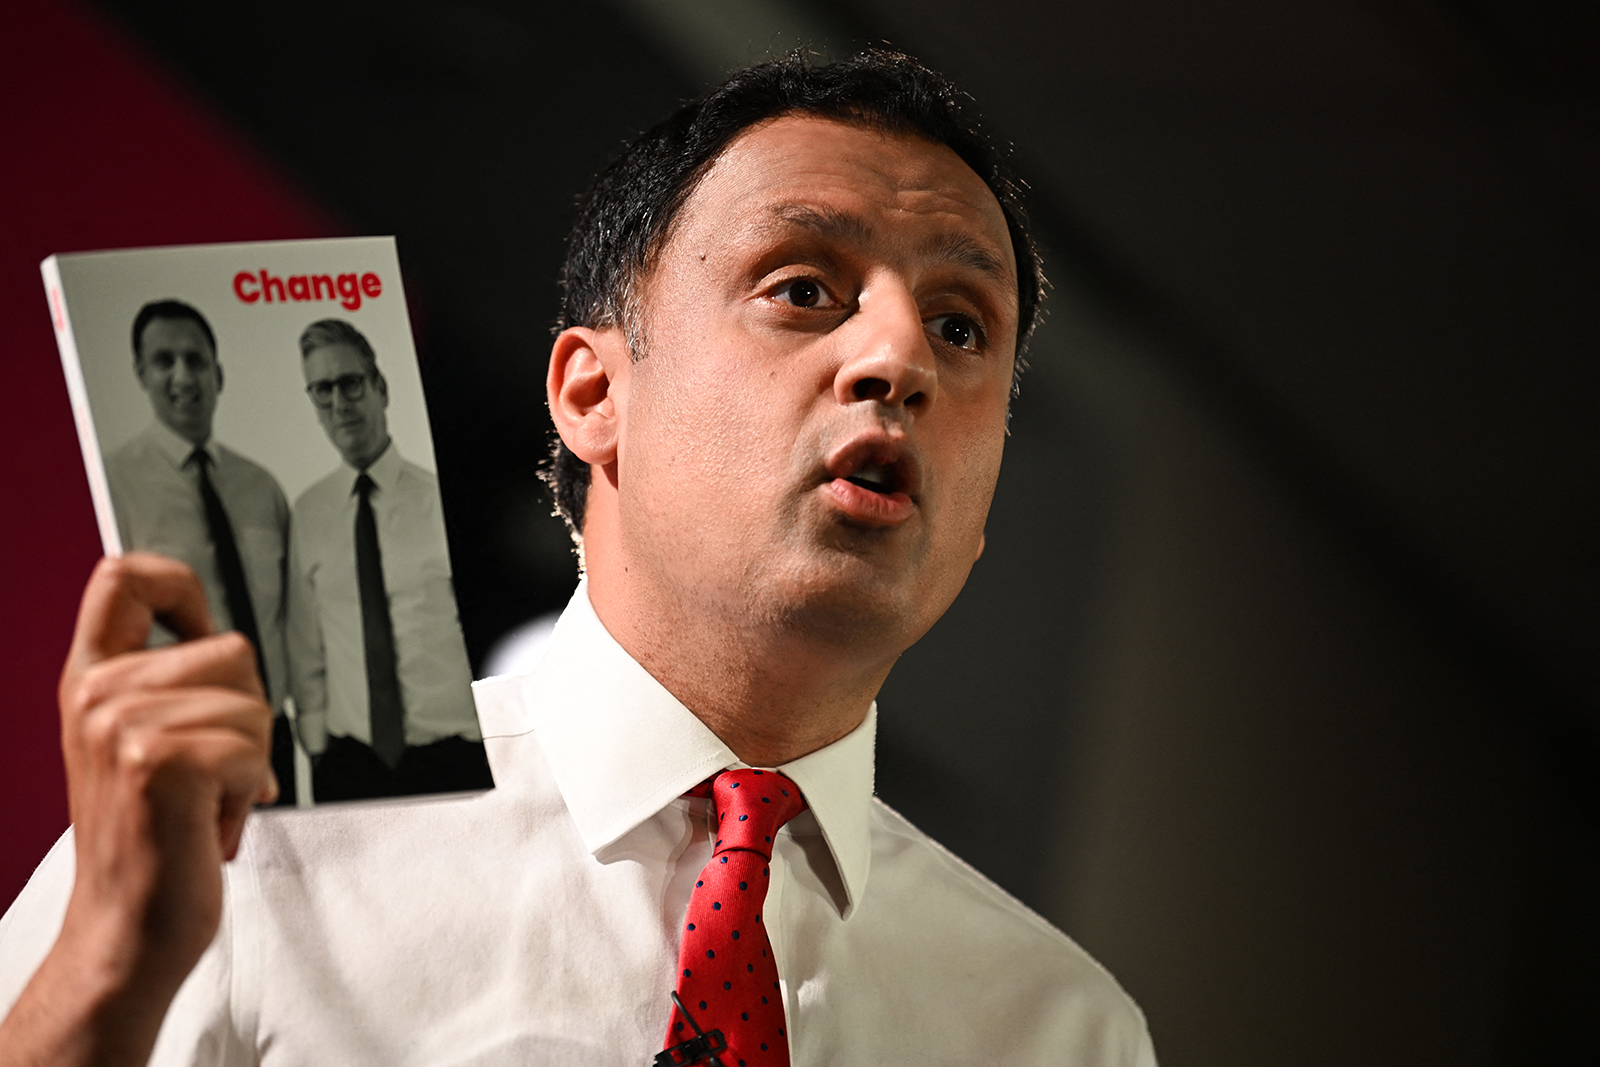 Leader of the Scottish Labour party Anas Sarwar delivers a speech on stage. Photo by Andy Buchanan/AFP via Getty Images.